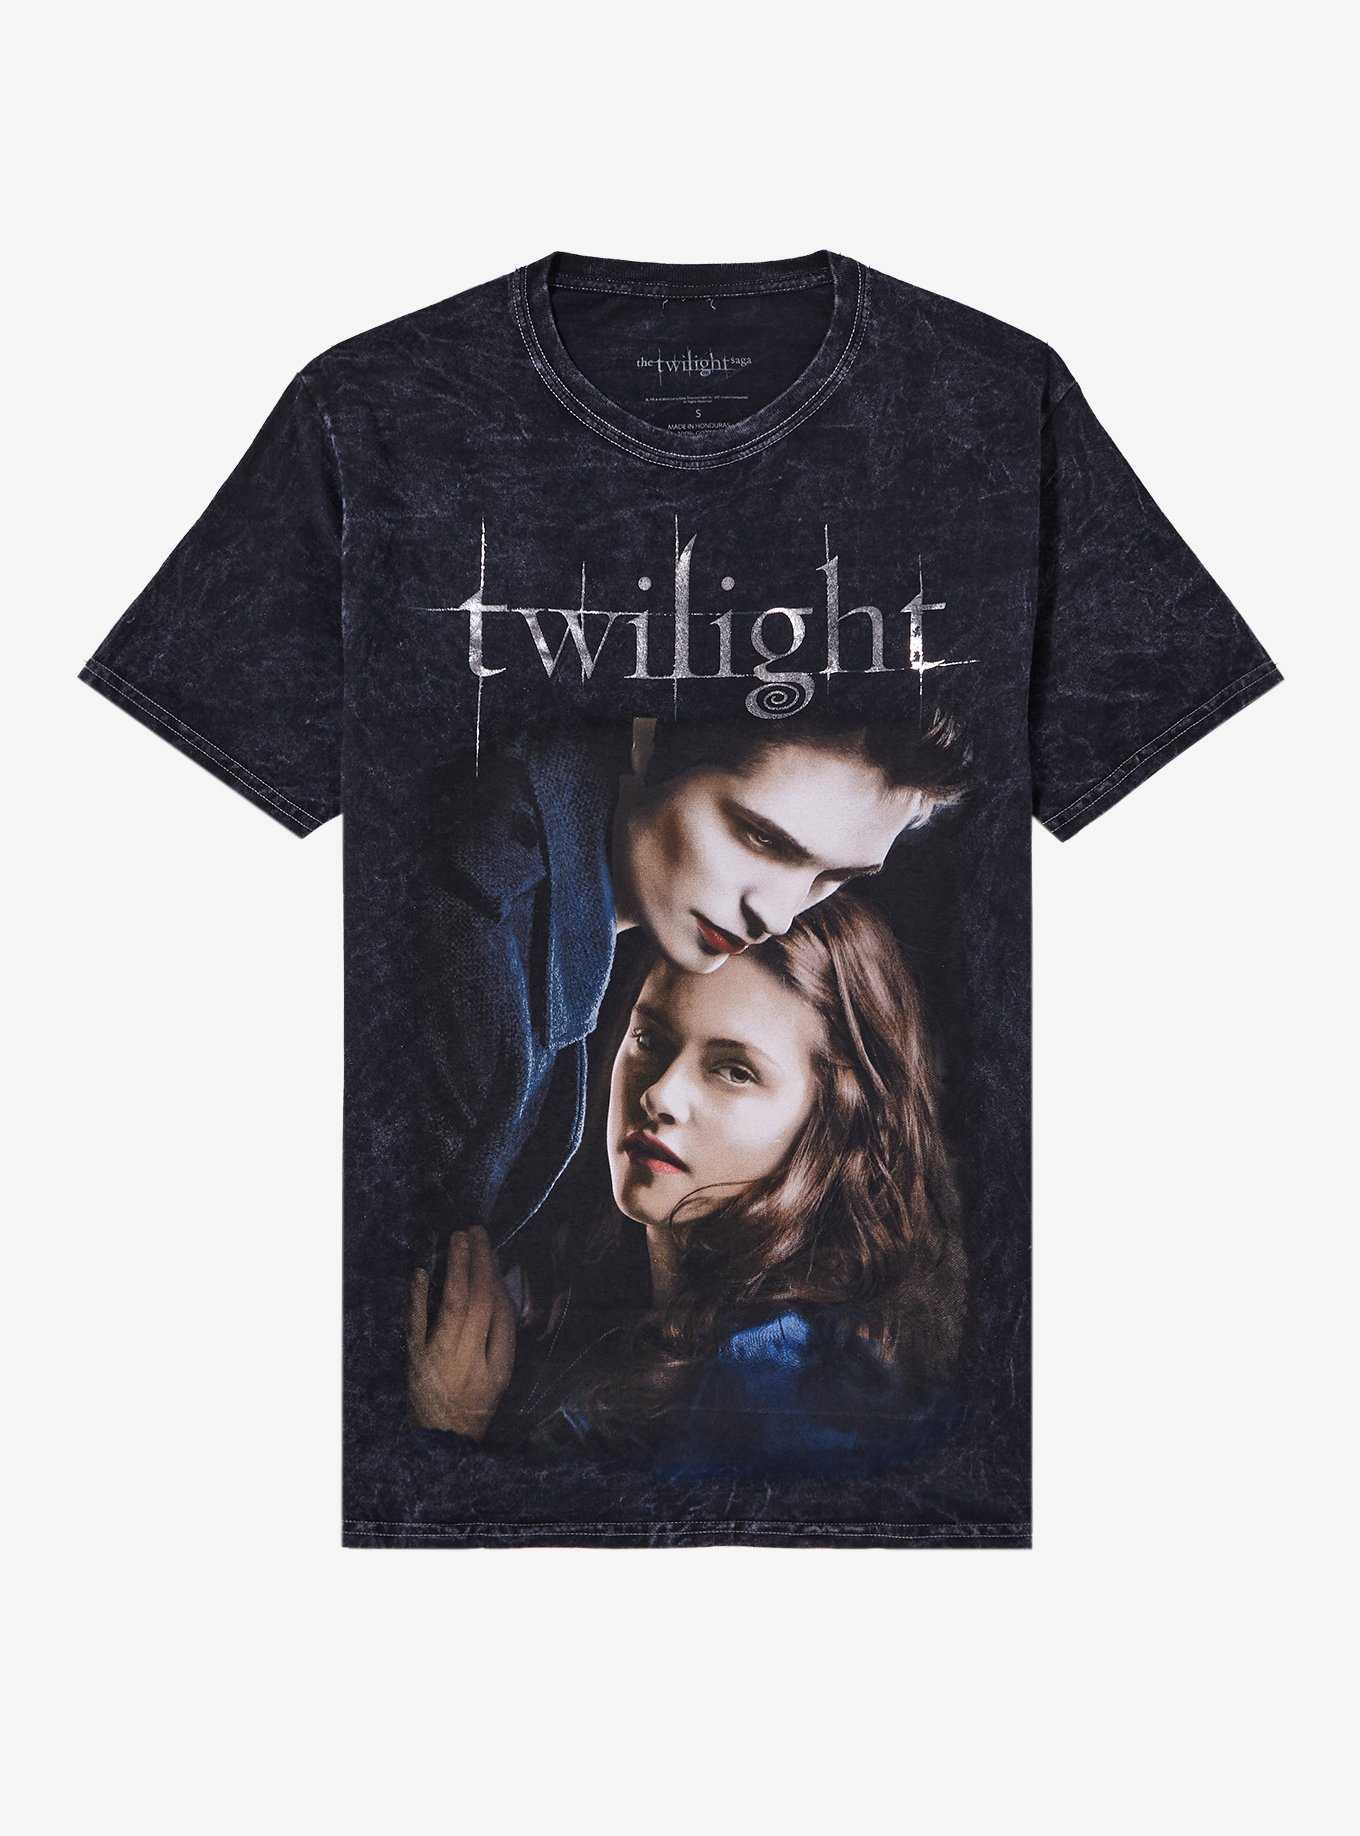 Twilight Edward Cullen Girly Shirt Hot Topic 2008 'You Are My Life